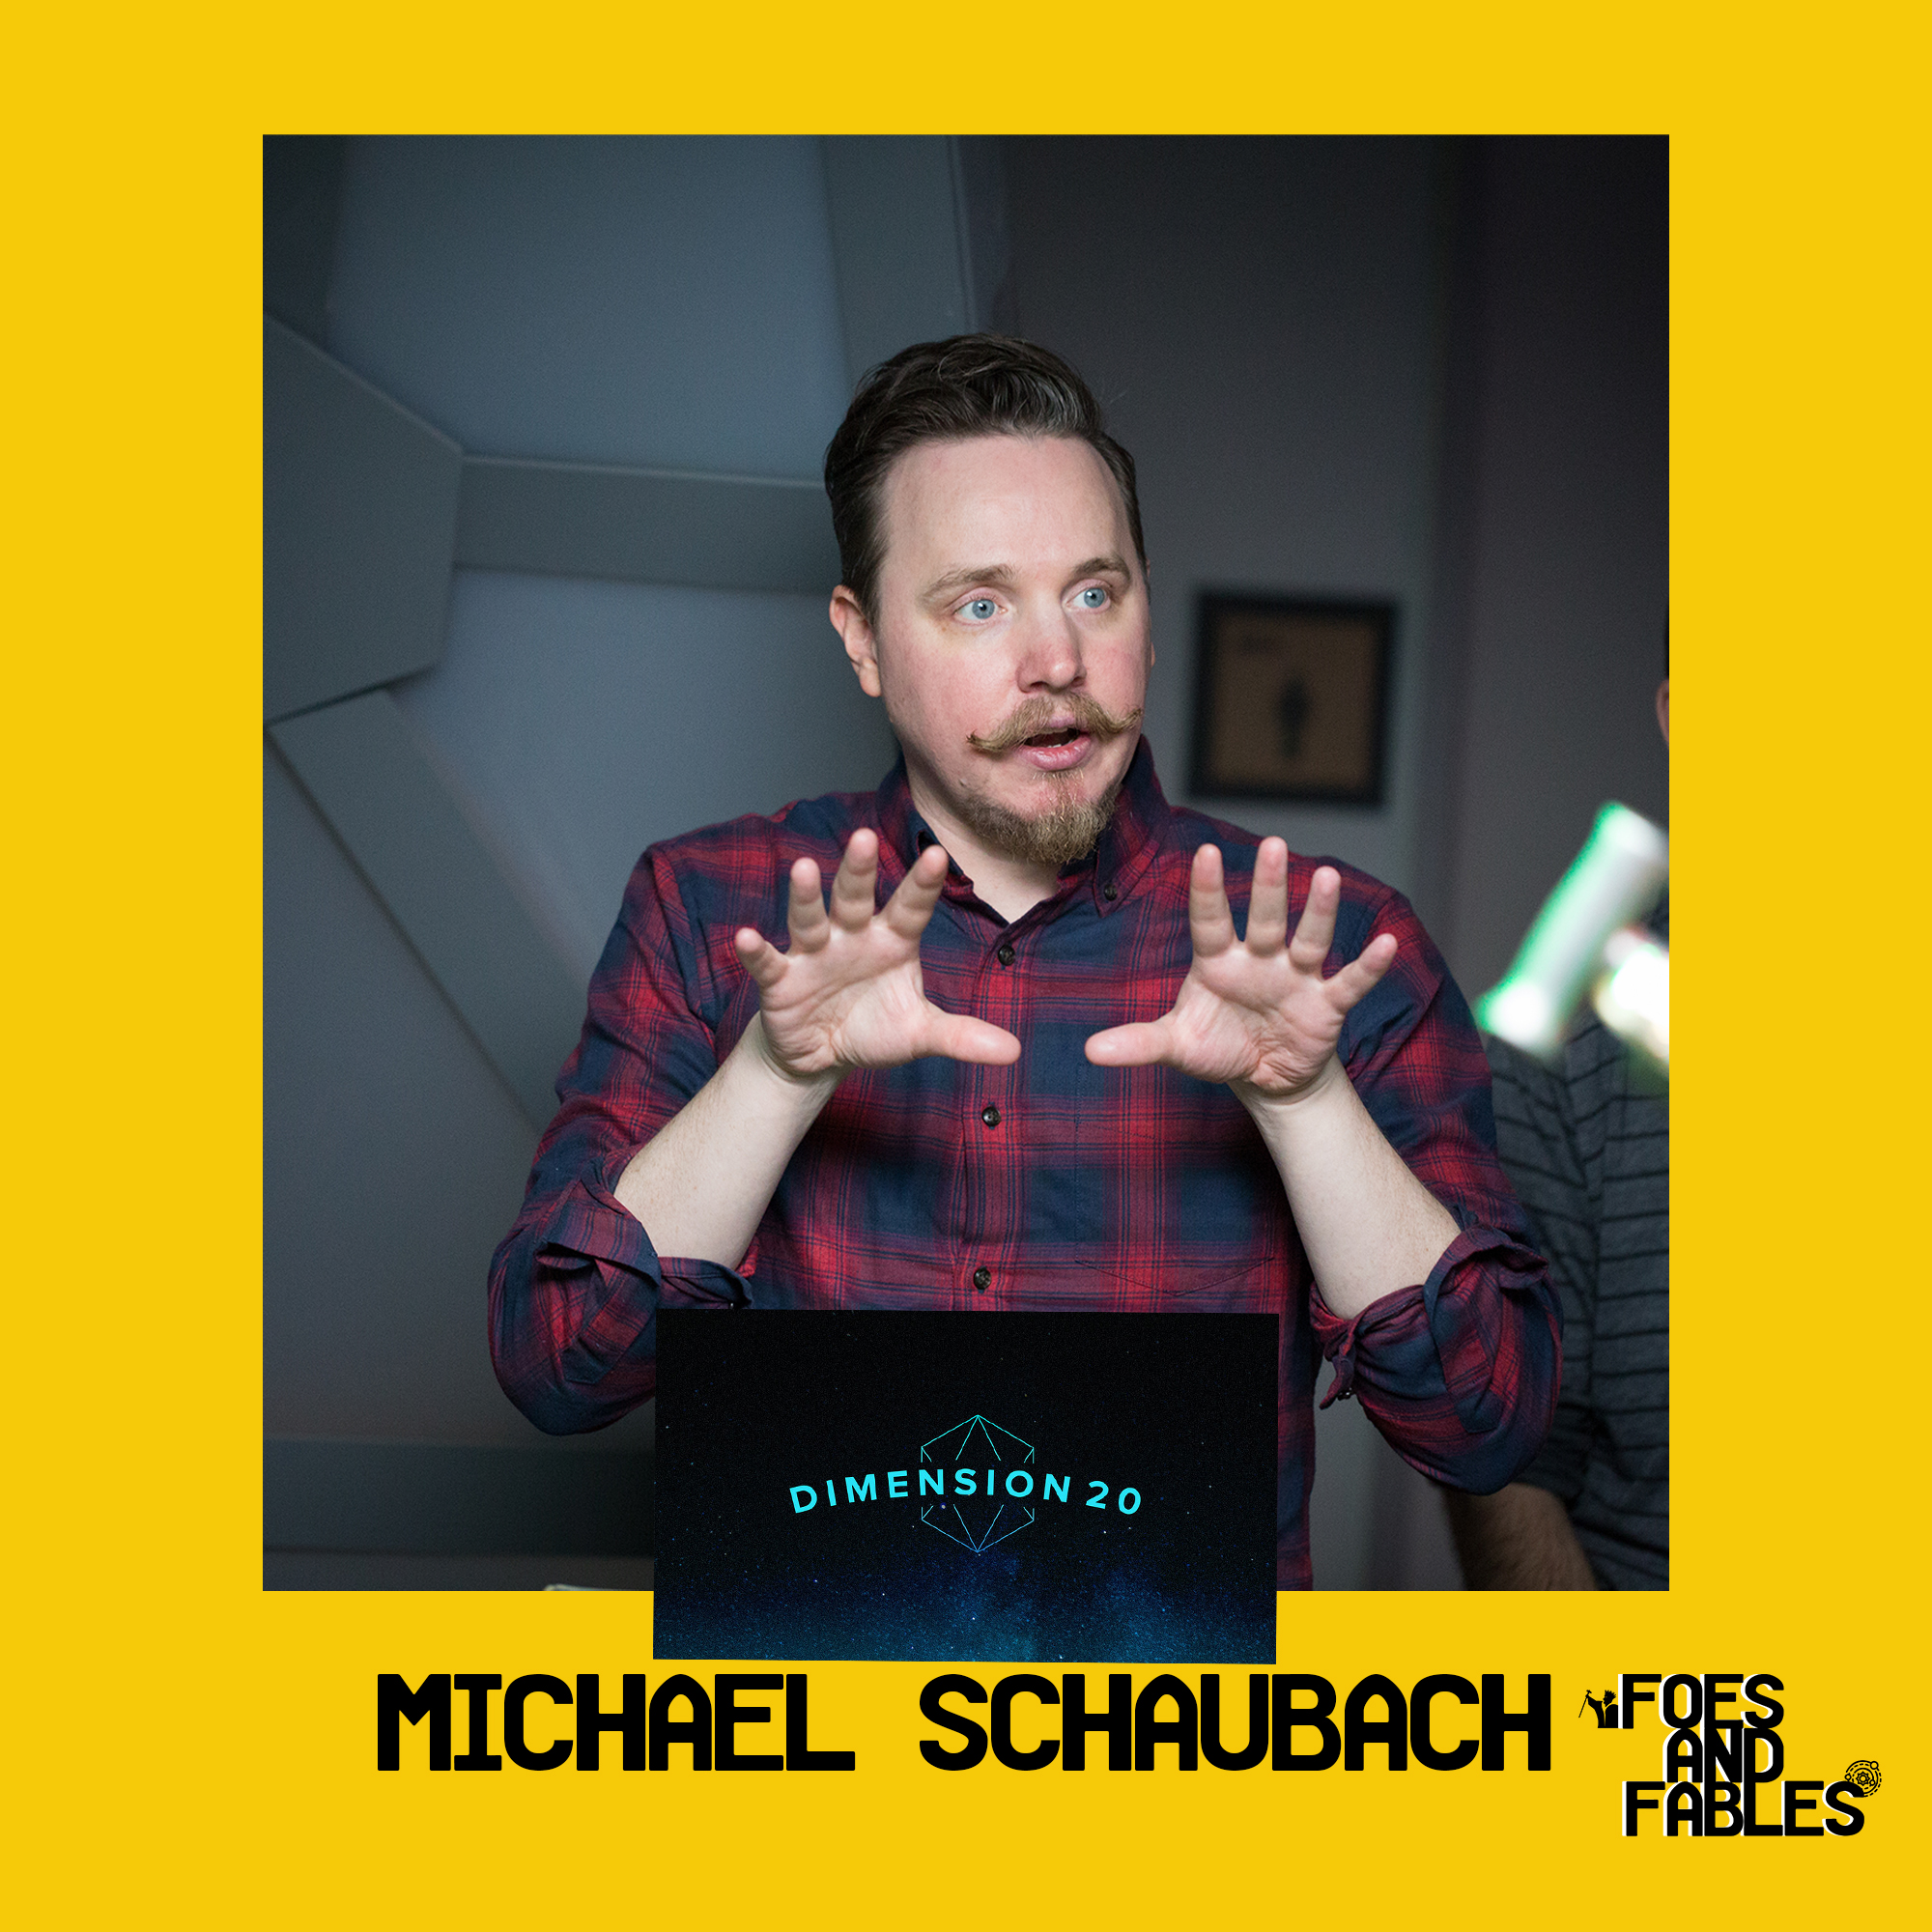 INTERVIEW - Michael Schaubach of Dimension 20 | Friends and Fables